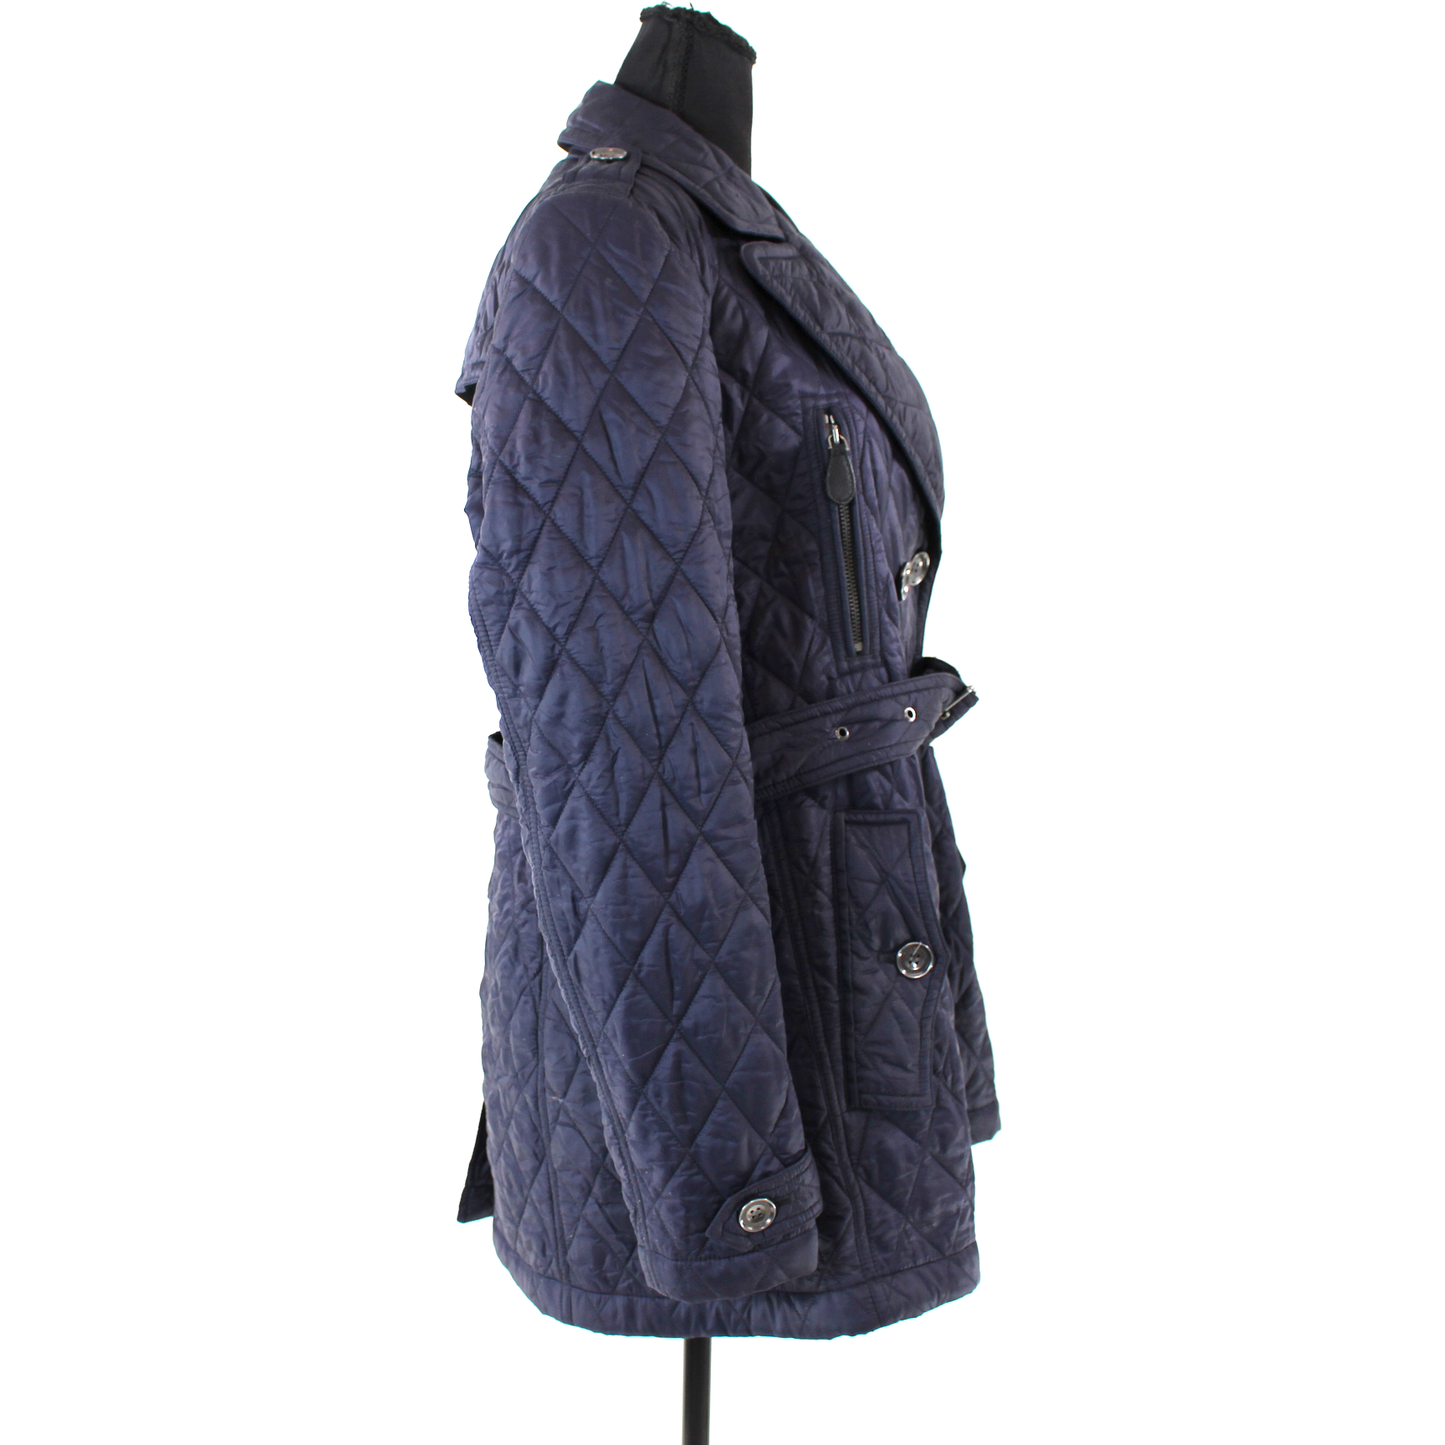 Burberry Brit Quilted Coat